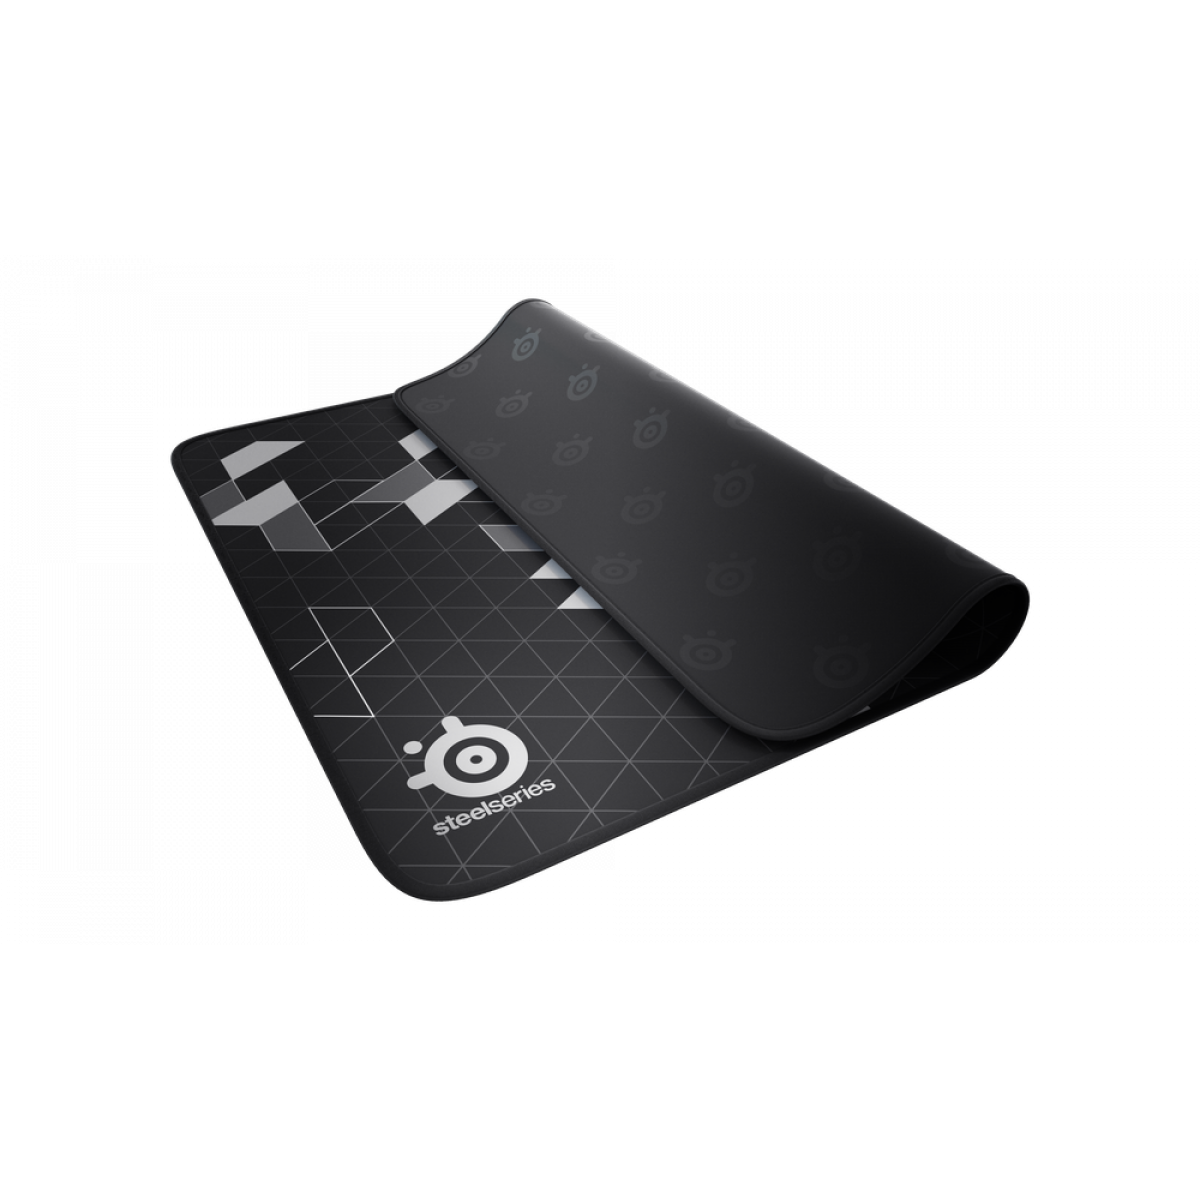 SteelSeries QcK+ Limited with stitch edges (450mm x 400mm x 3mm)